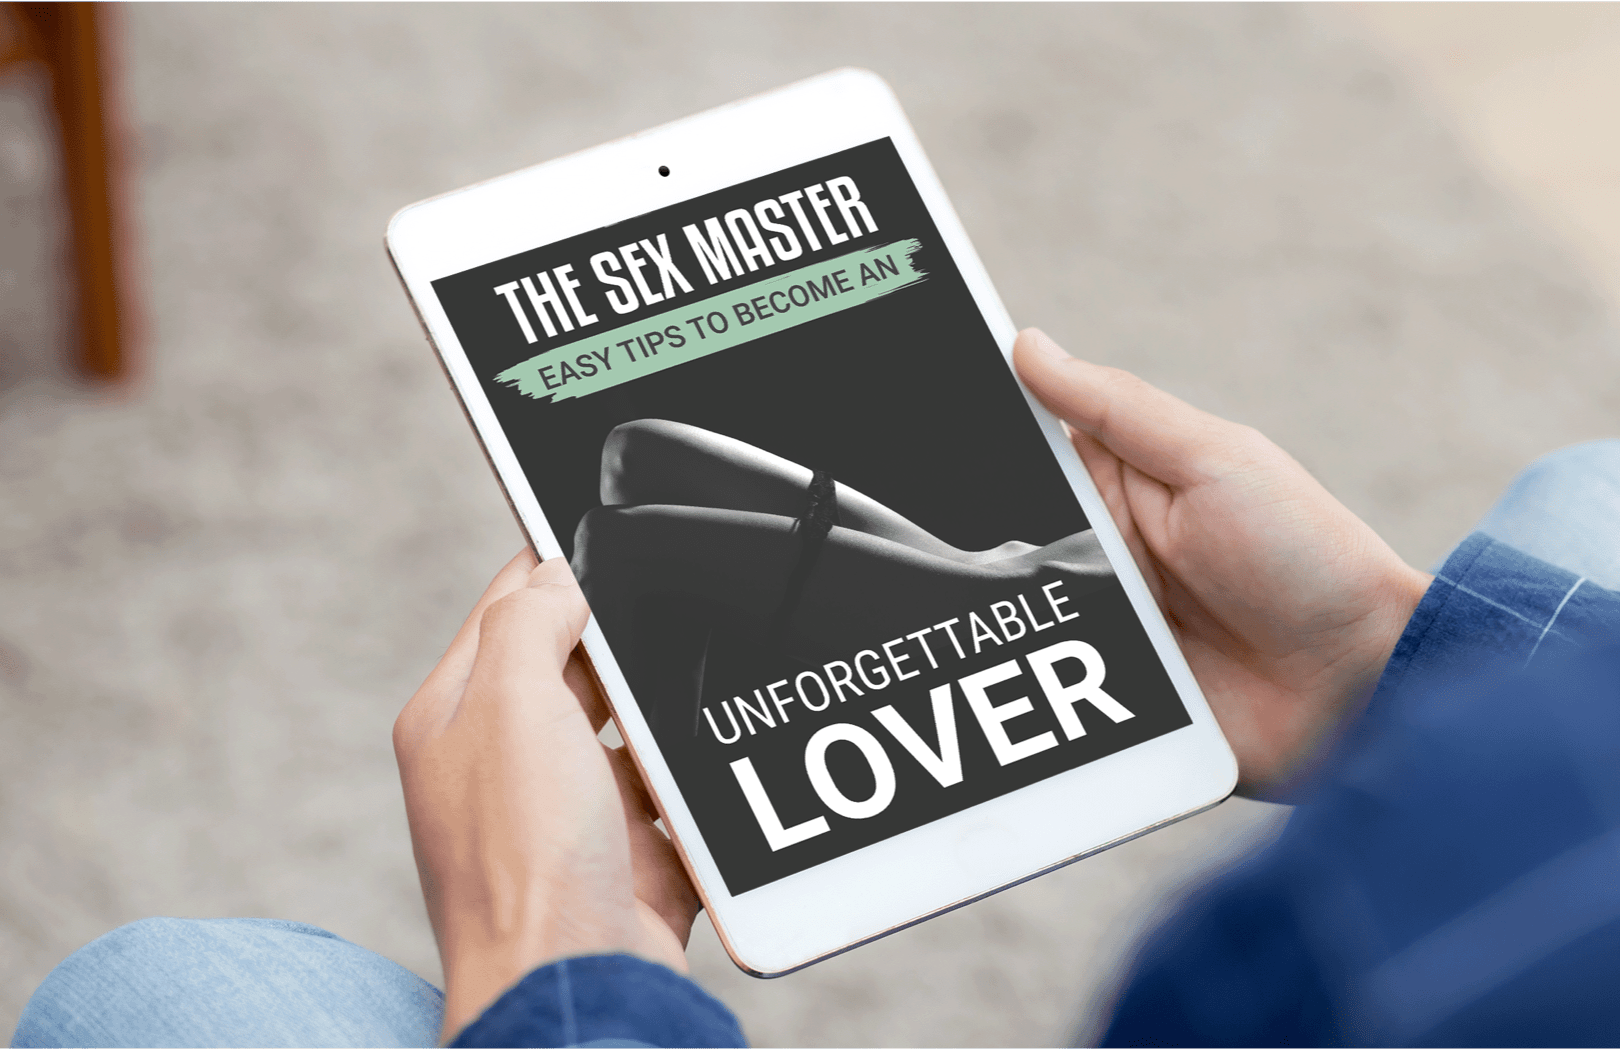 PotentStream bonus1 The Sex Master: Easy Tips To Become an Unforgettable Lover